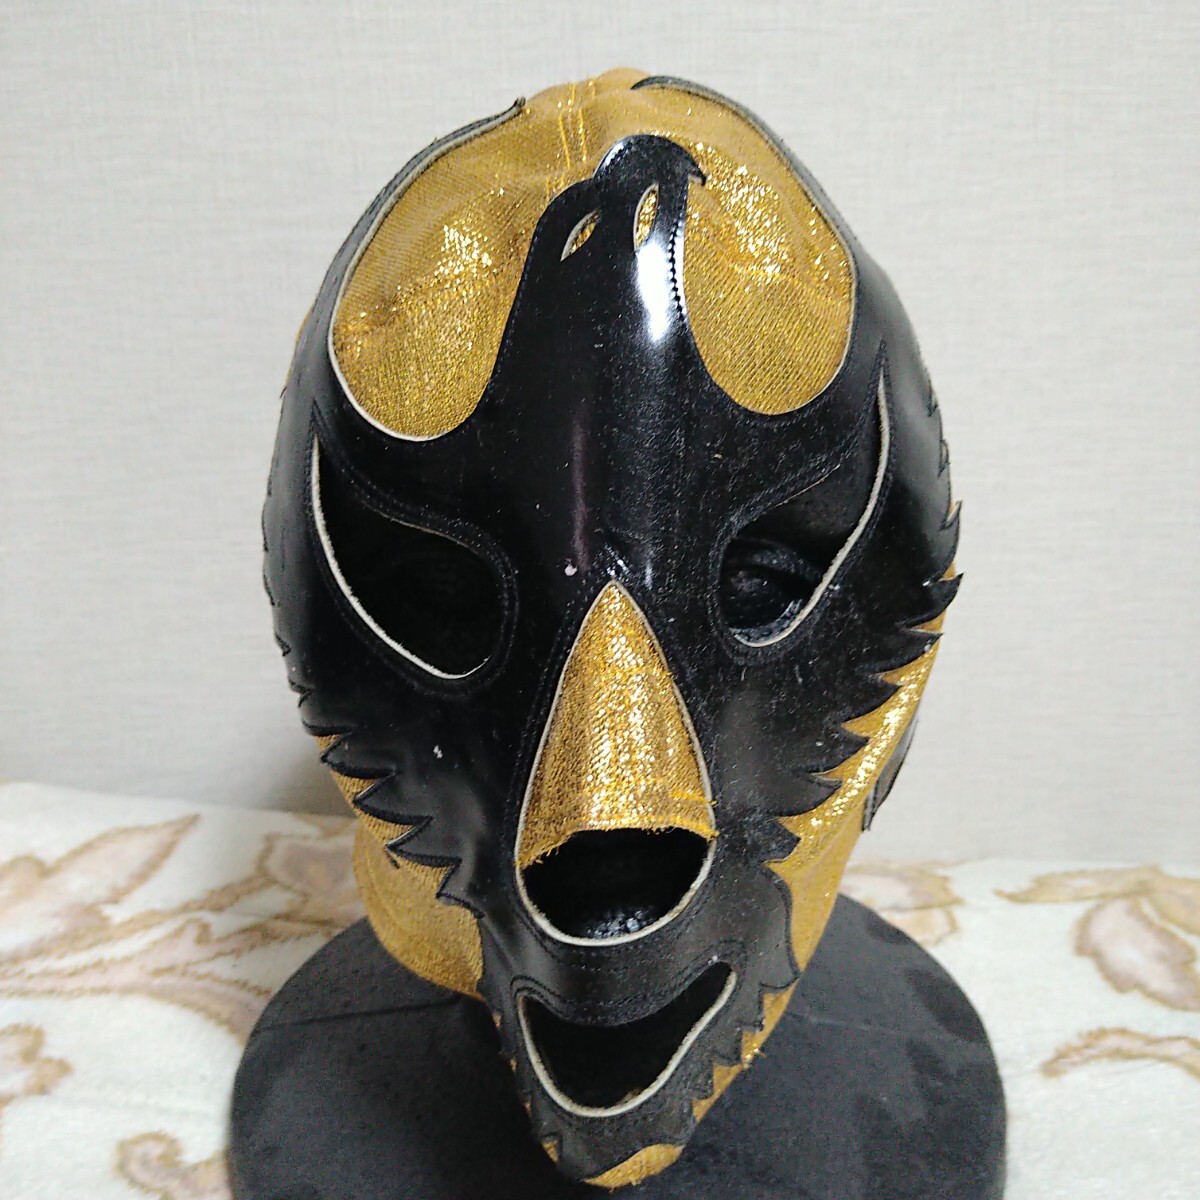  Mill mascara s Lopez made mask tag attaching . mask 2000 period CMLL Japan three war hour same one model mask Mill mascara s